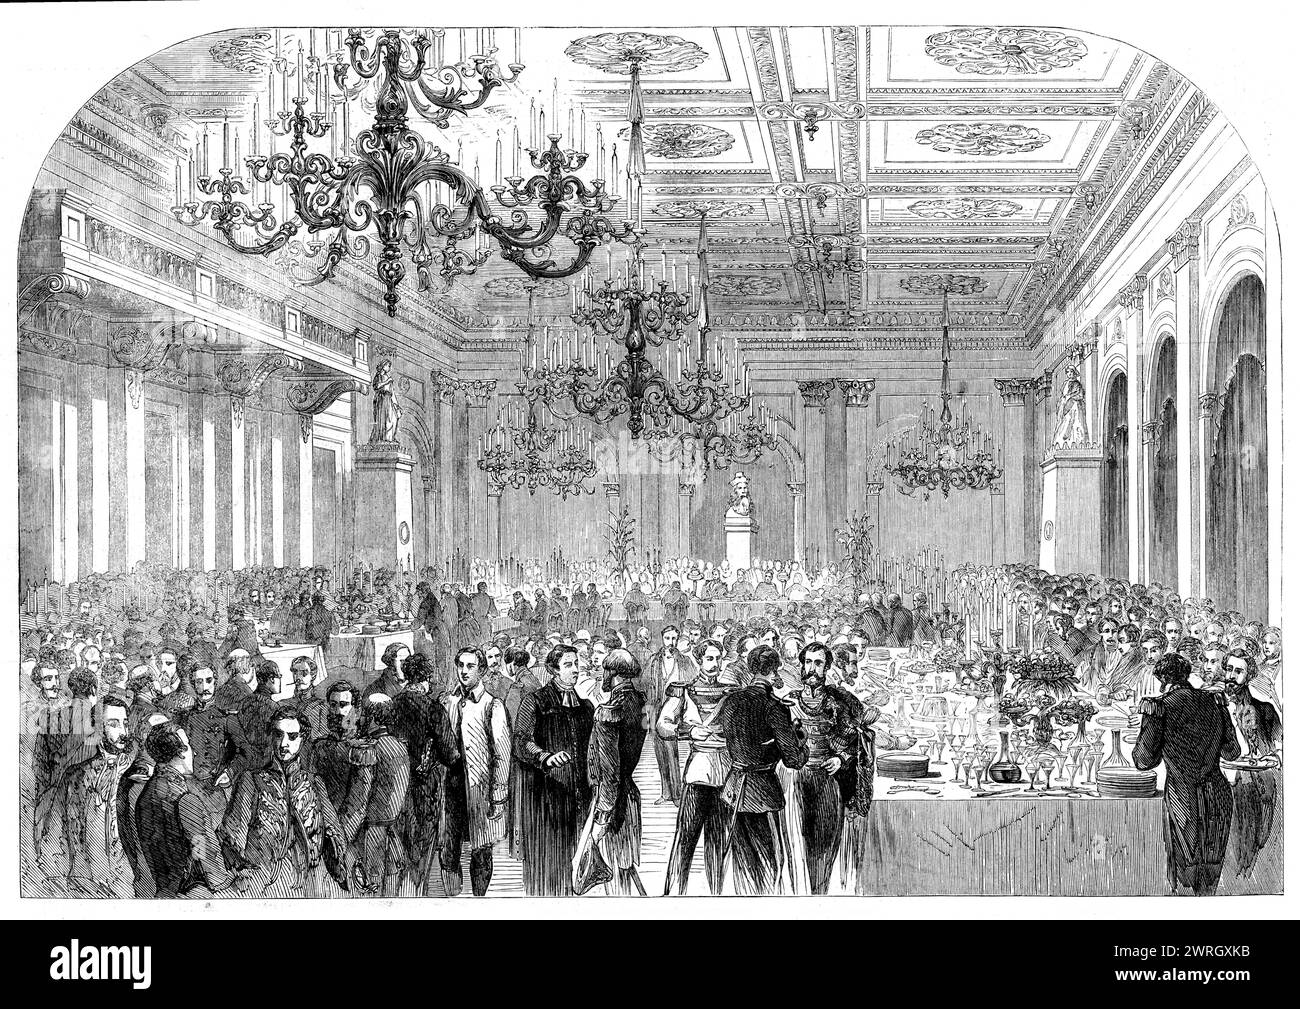 Banquet given at the Exchange, Gottenburg, on the occasion of opening the railway between Gottenburg to Stockholm - from a sketch by our special artist, 1862. '...there was a ball at the Exchange, attended by about 1500 ladies and gentlemen. On the following evening a banquet was served in the same grand saloon. The King [Charles XV of Sweden and Norway], Prince Oscar, Prince August, and all the high dignitaries of State being seated at the upper end of the room, the remaining guests, in number about 600, taking dinner at the other tables standing. This was succeeded by a concert in the theatr Stock Photo